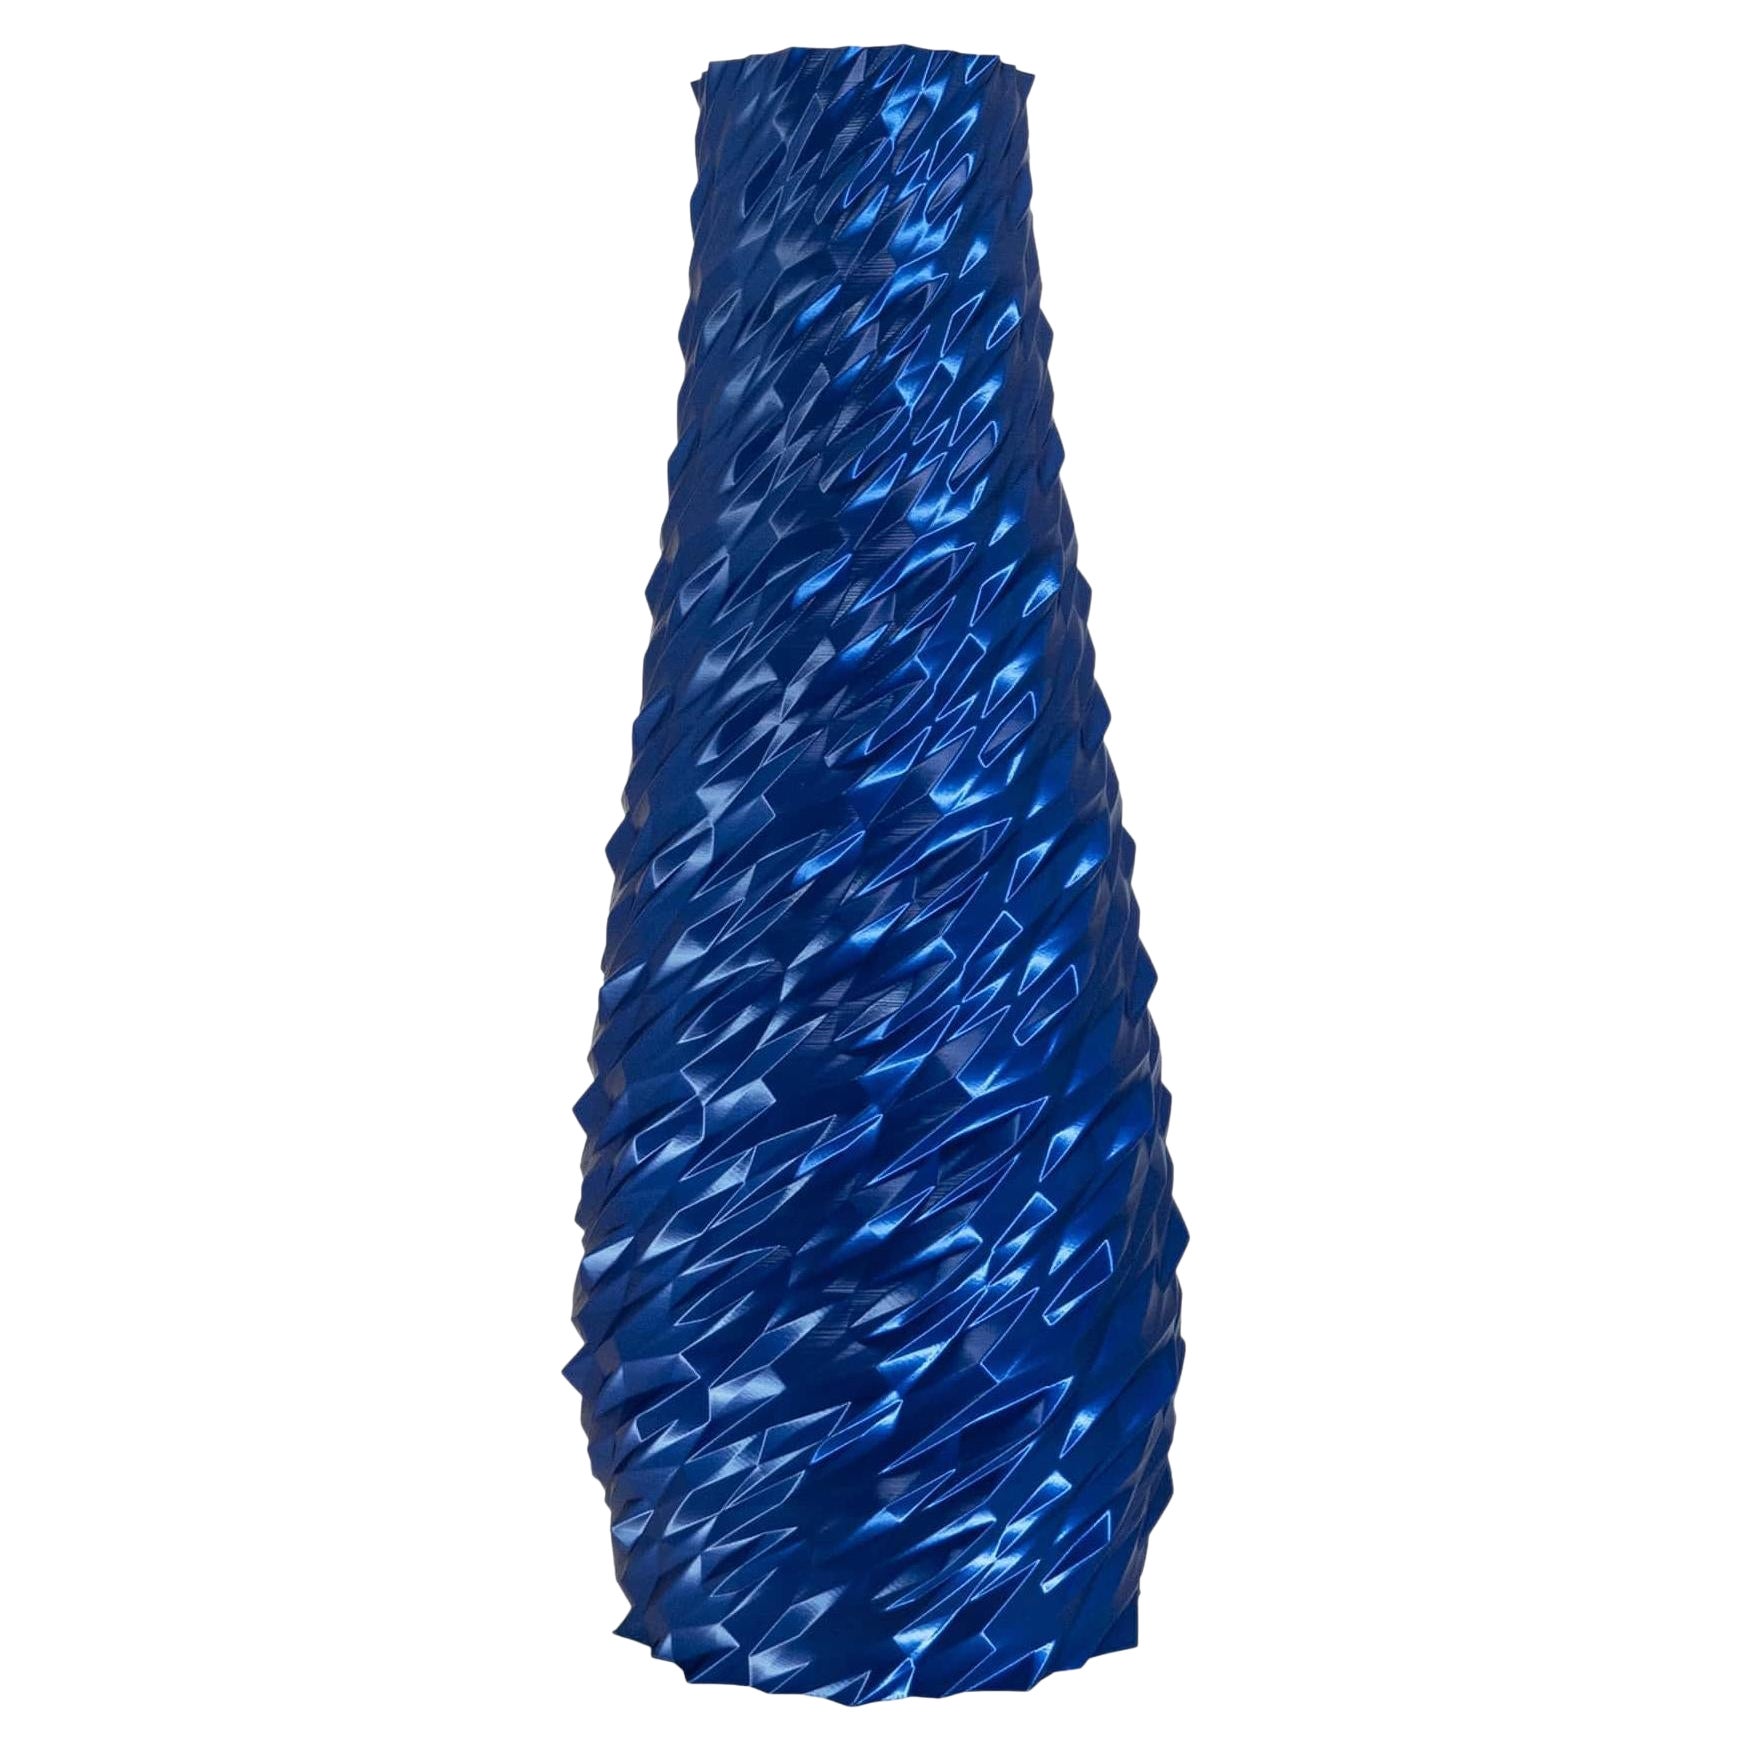 Dragonskin, Blue Contemporary Sustainable Vase-Sculpture For Sale